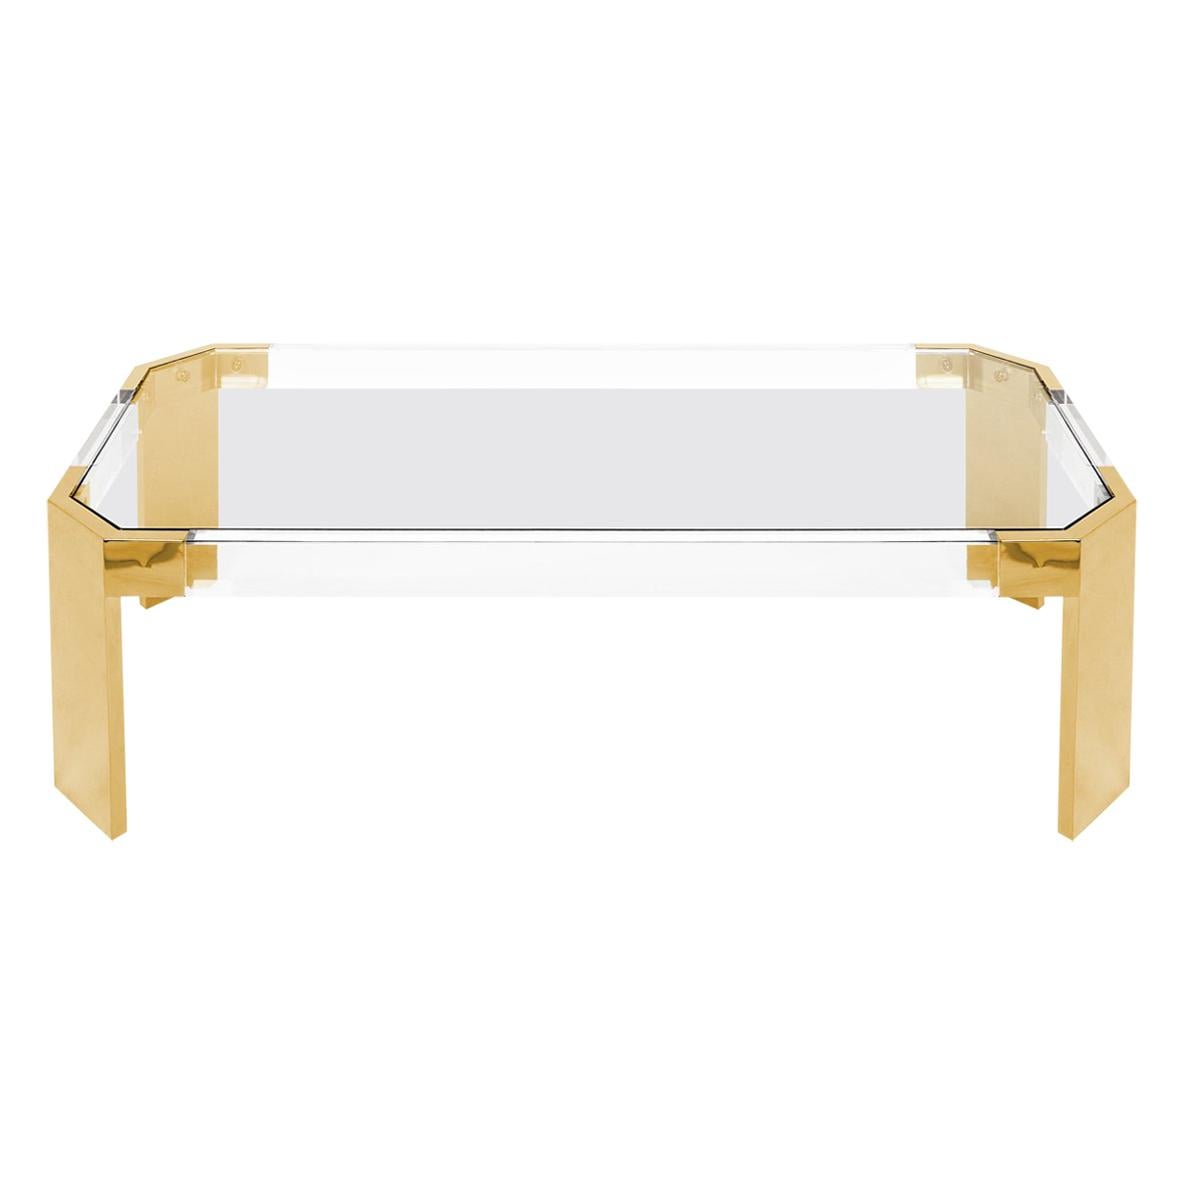 Lucite and Brass Modern Rectangular Coffee Table with Glass Top